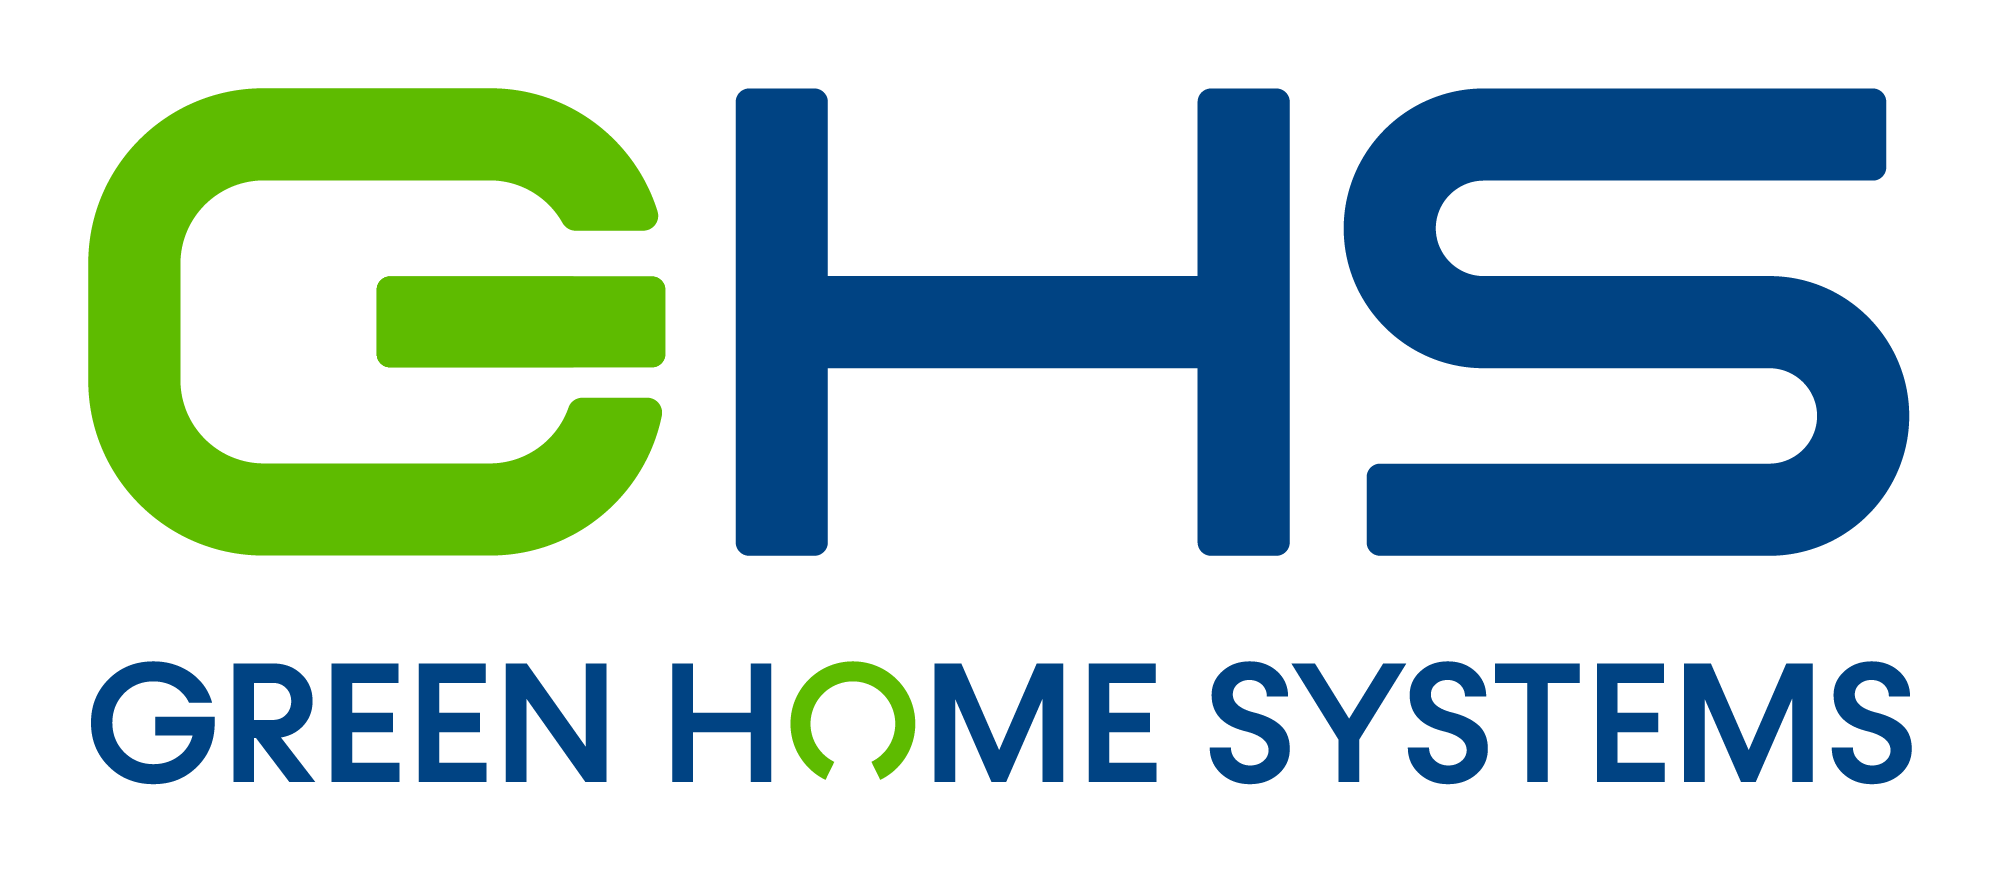 green home systems